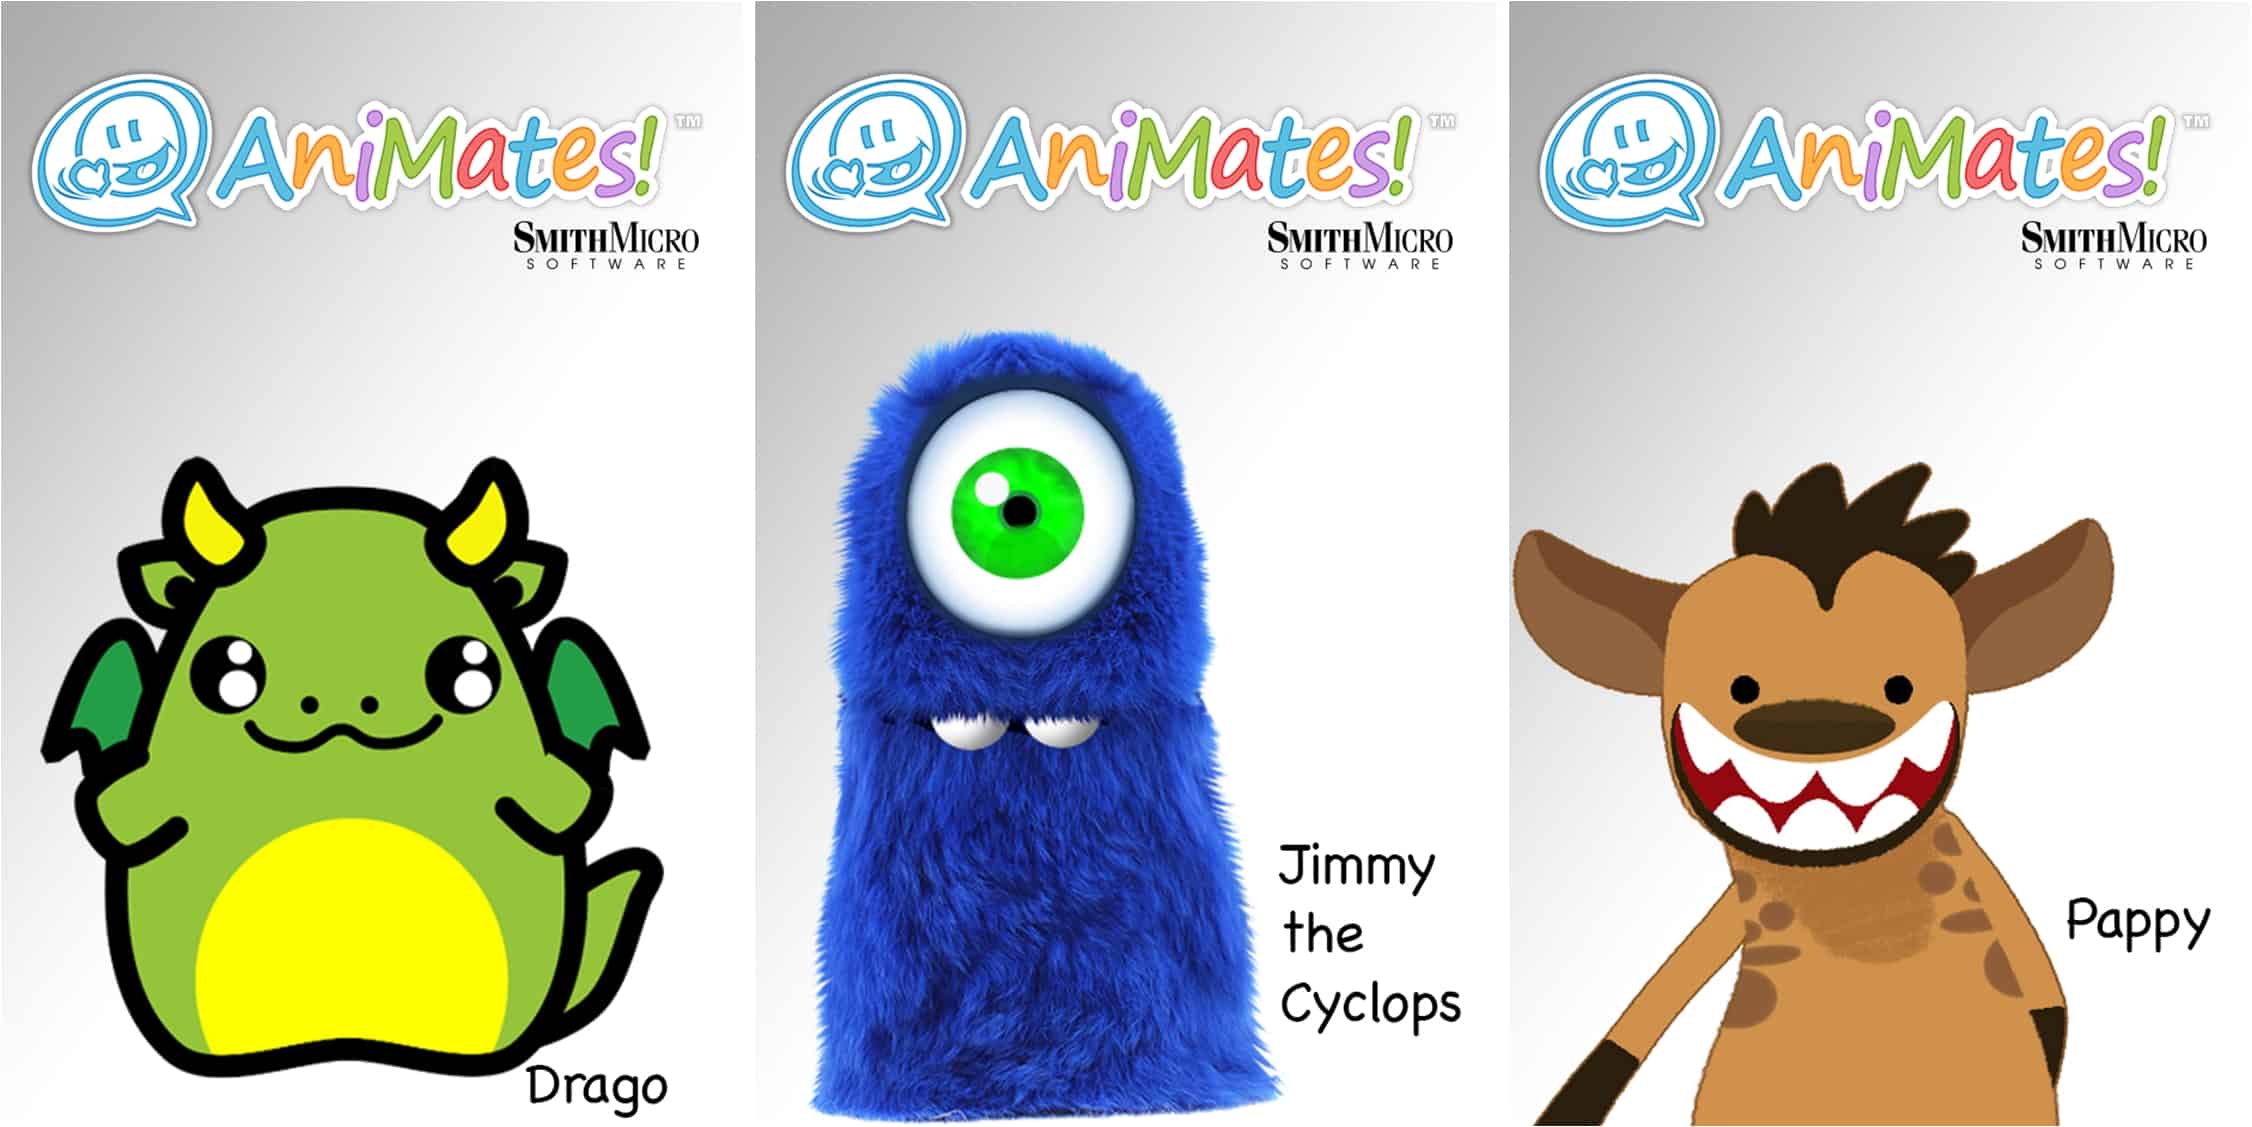 Let Your Avatars Do the Talking, Smith Micro Lines Up Latest Characters via AniMates